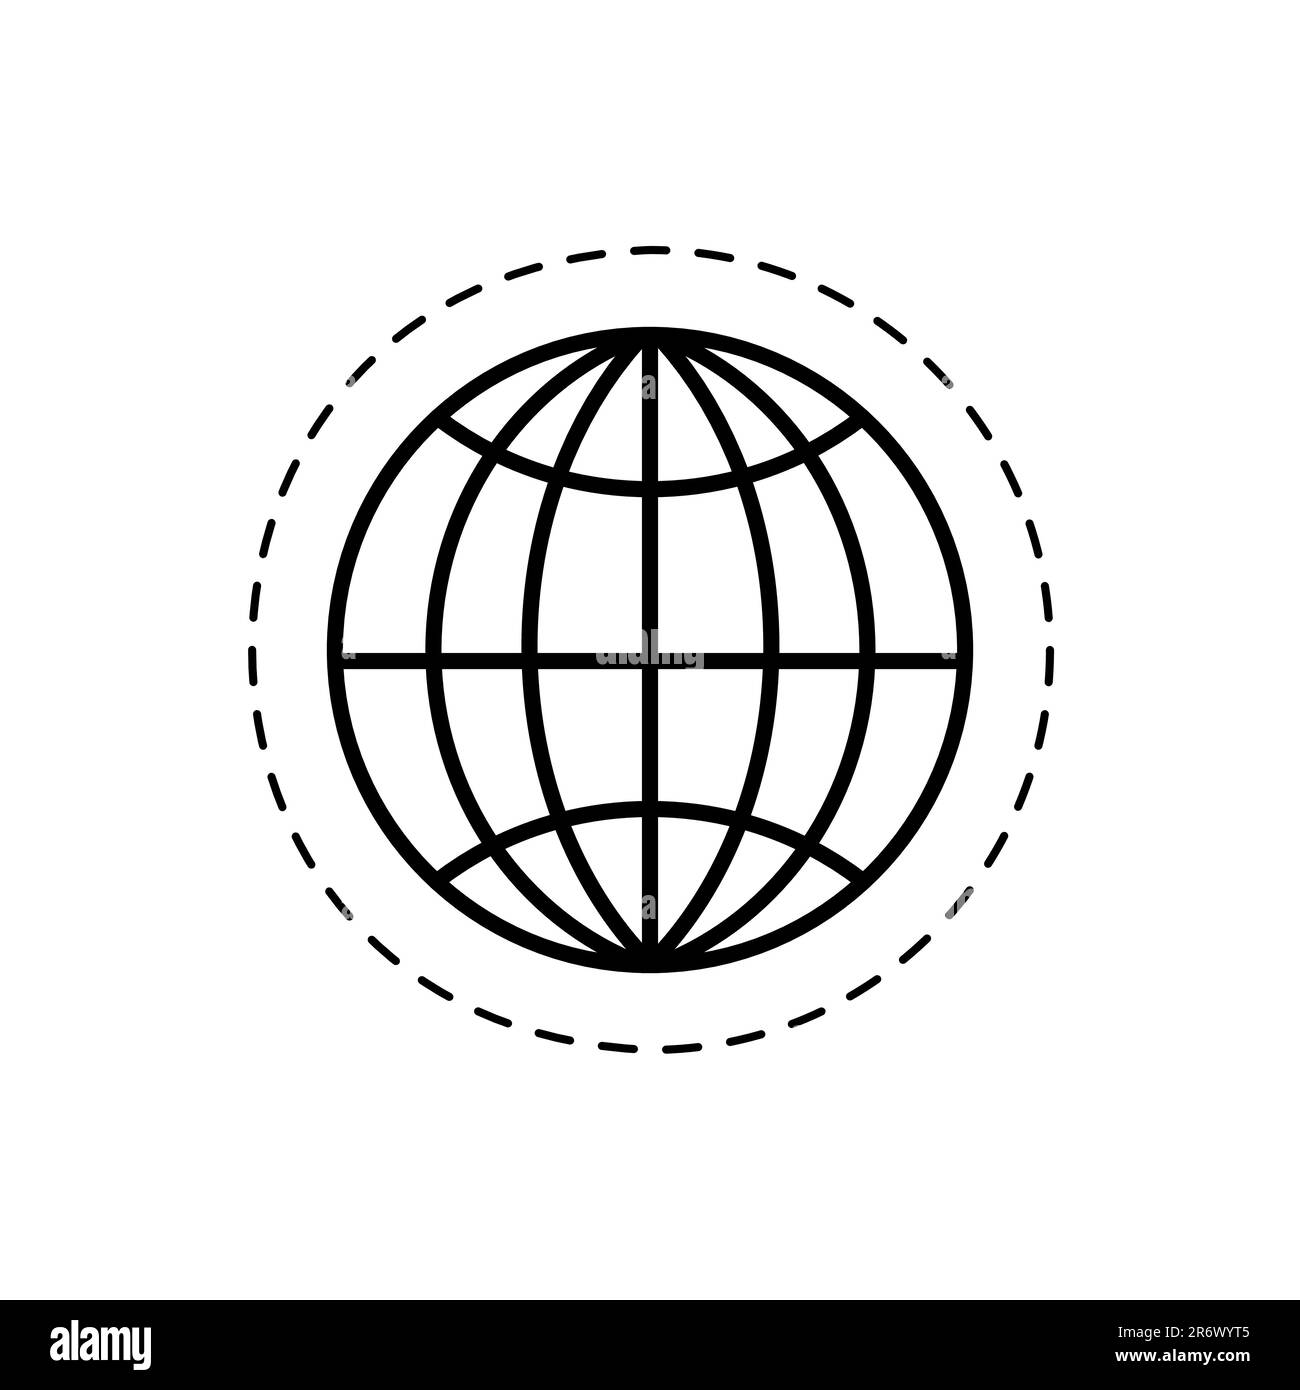 World icon. Earth symbol isolated on white background. Vector illustration. Simple world abstract icon in black. Line symbol for website design, app, Stock Vector